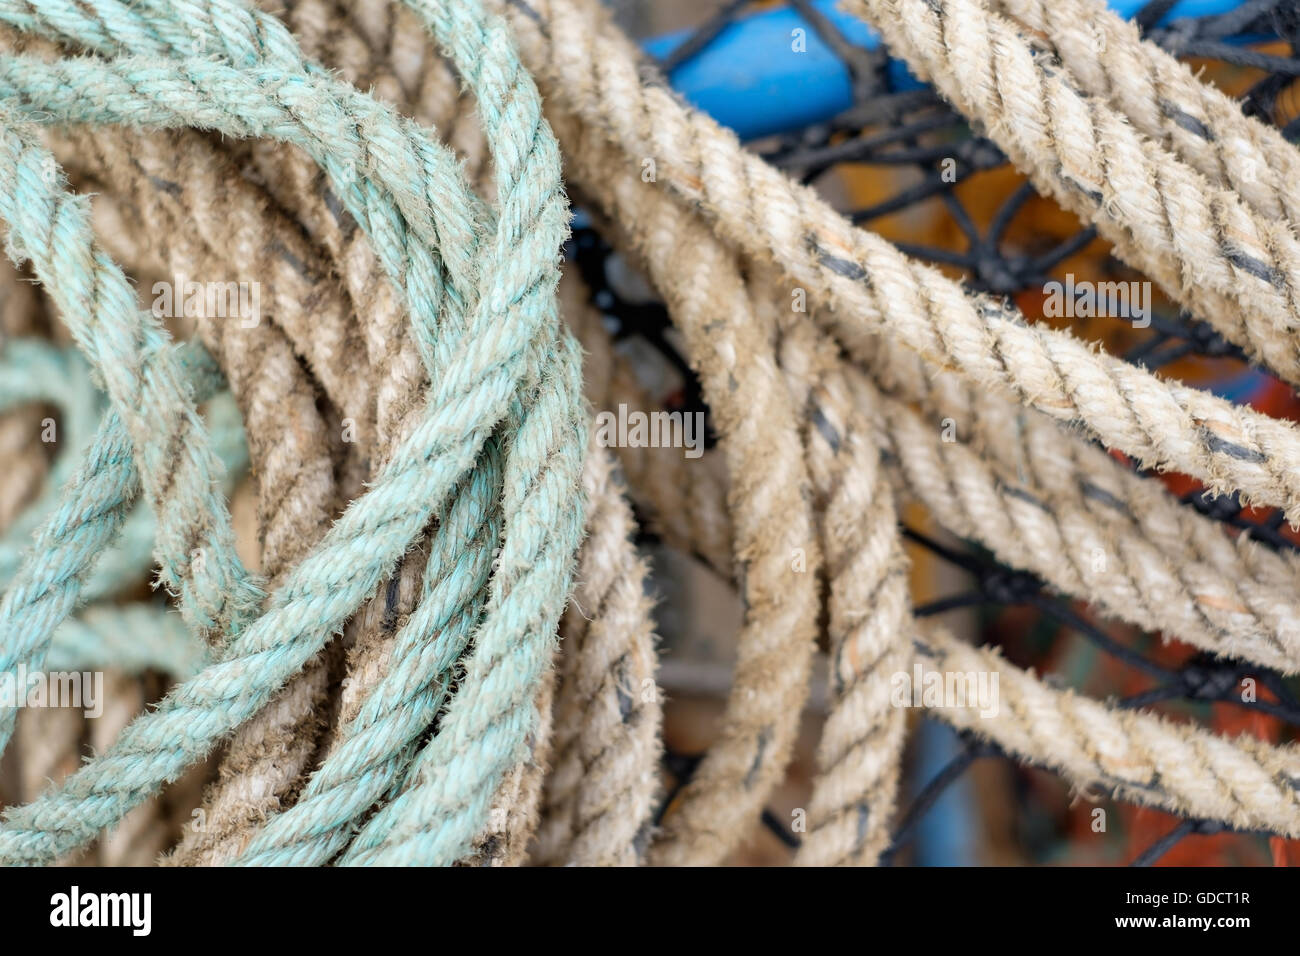 A tangle of old mooring ropes on a boat. Stock Photo